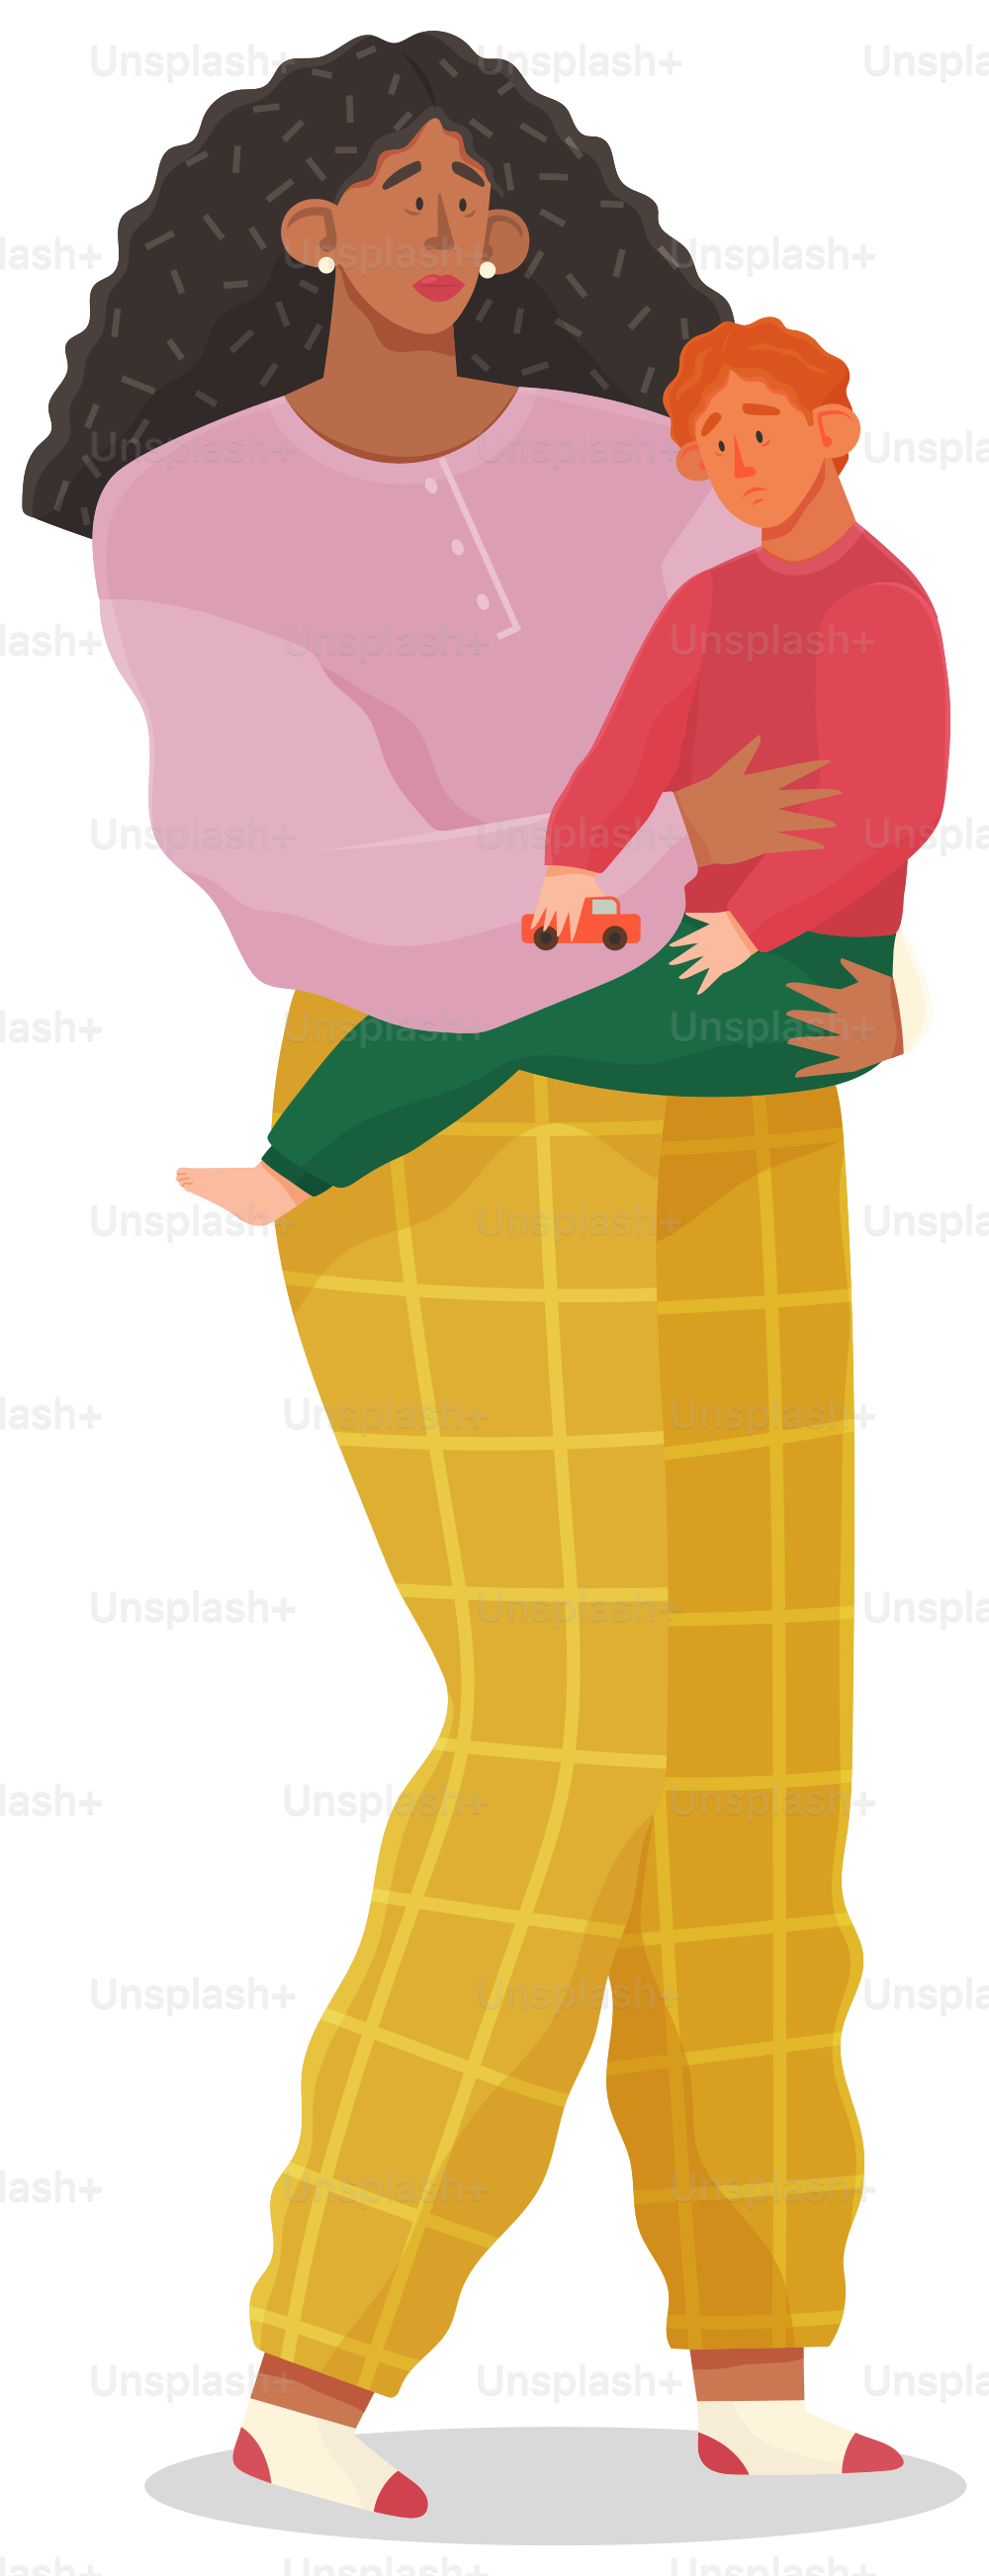 Woman and sweet child. Mother and son concept. Female character standing and holding little boy in her arms. Mom hugging her kid - cartoon woman holding and comforting toddler son isolated on white